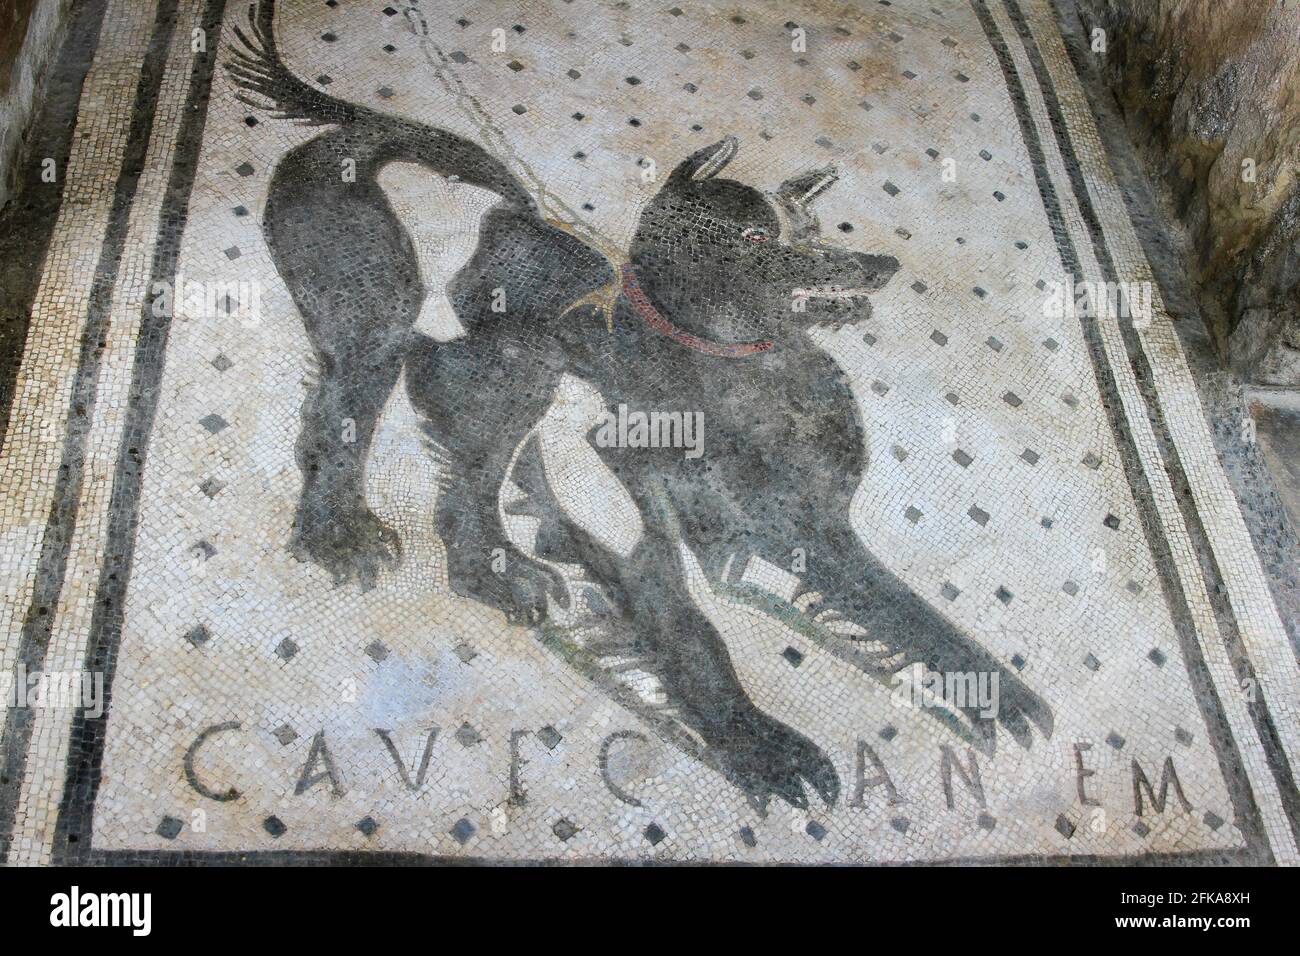 Cave canem Roman mosaic at the entrance to the House of the Tragic Poet in Pompeii, Italy Stock Photo